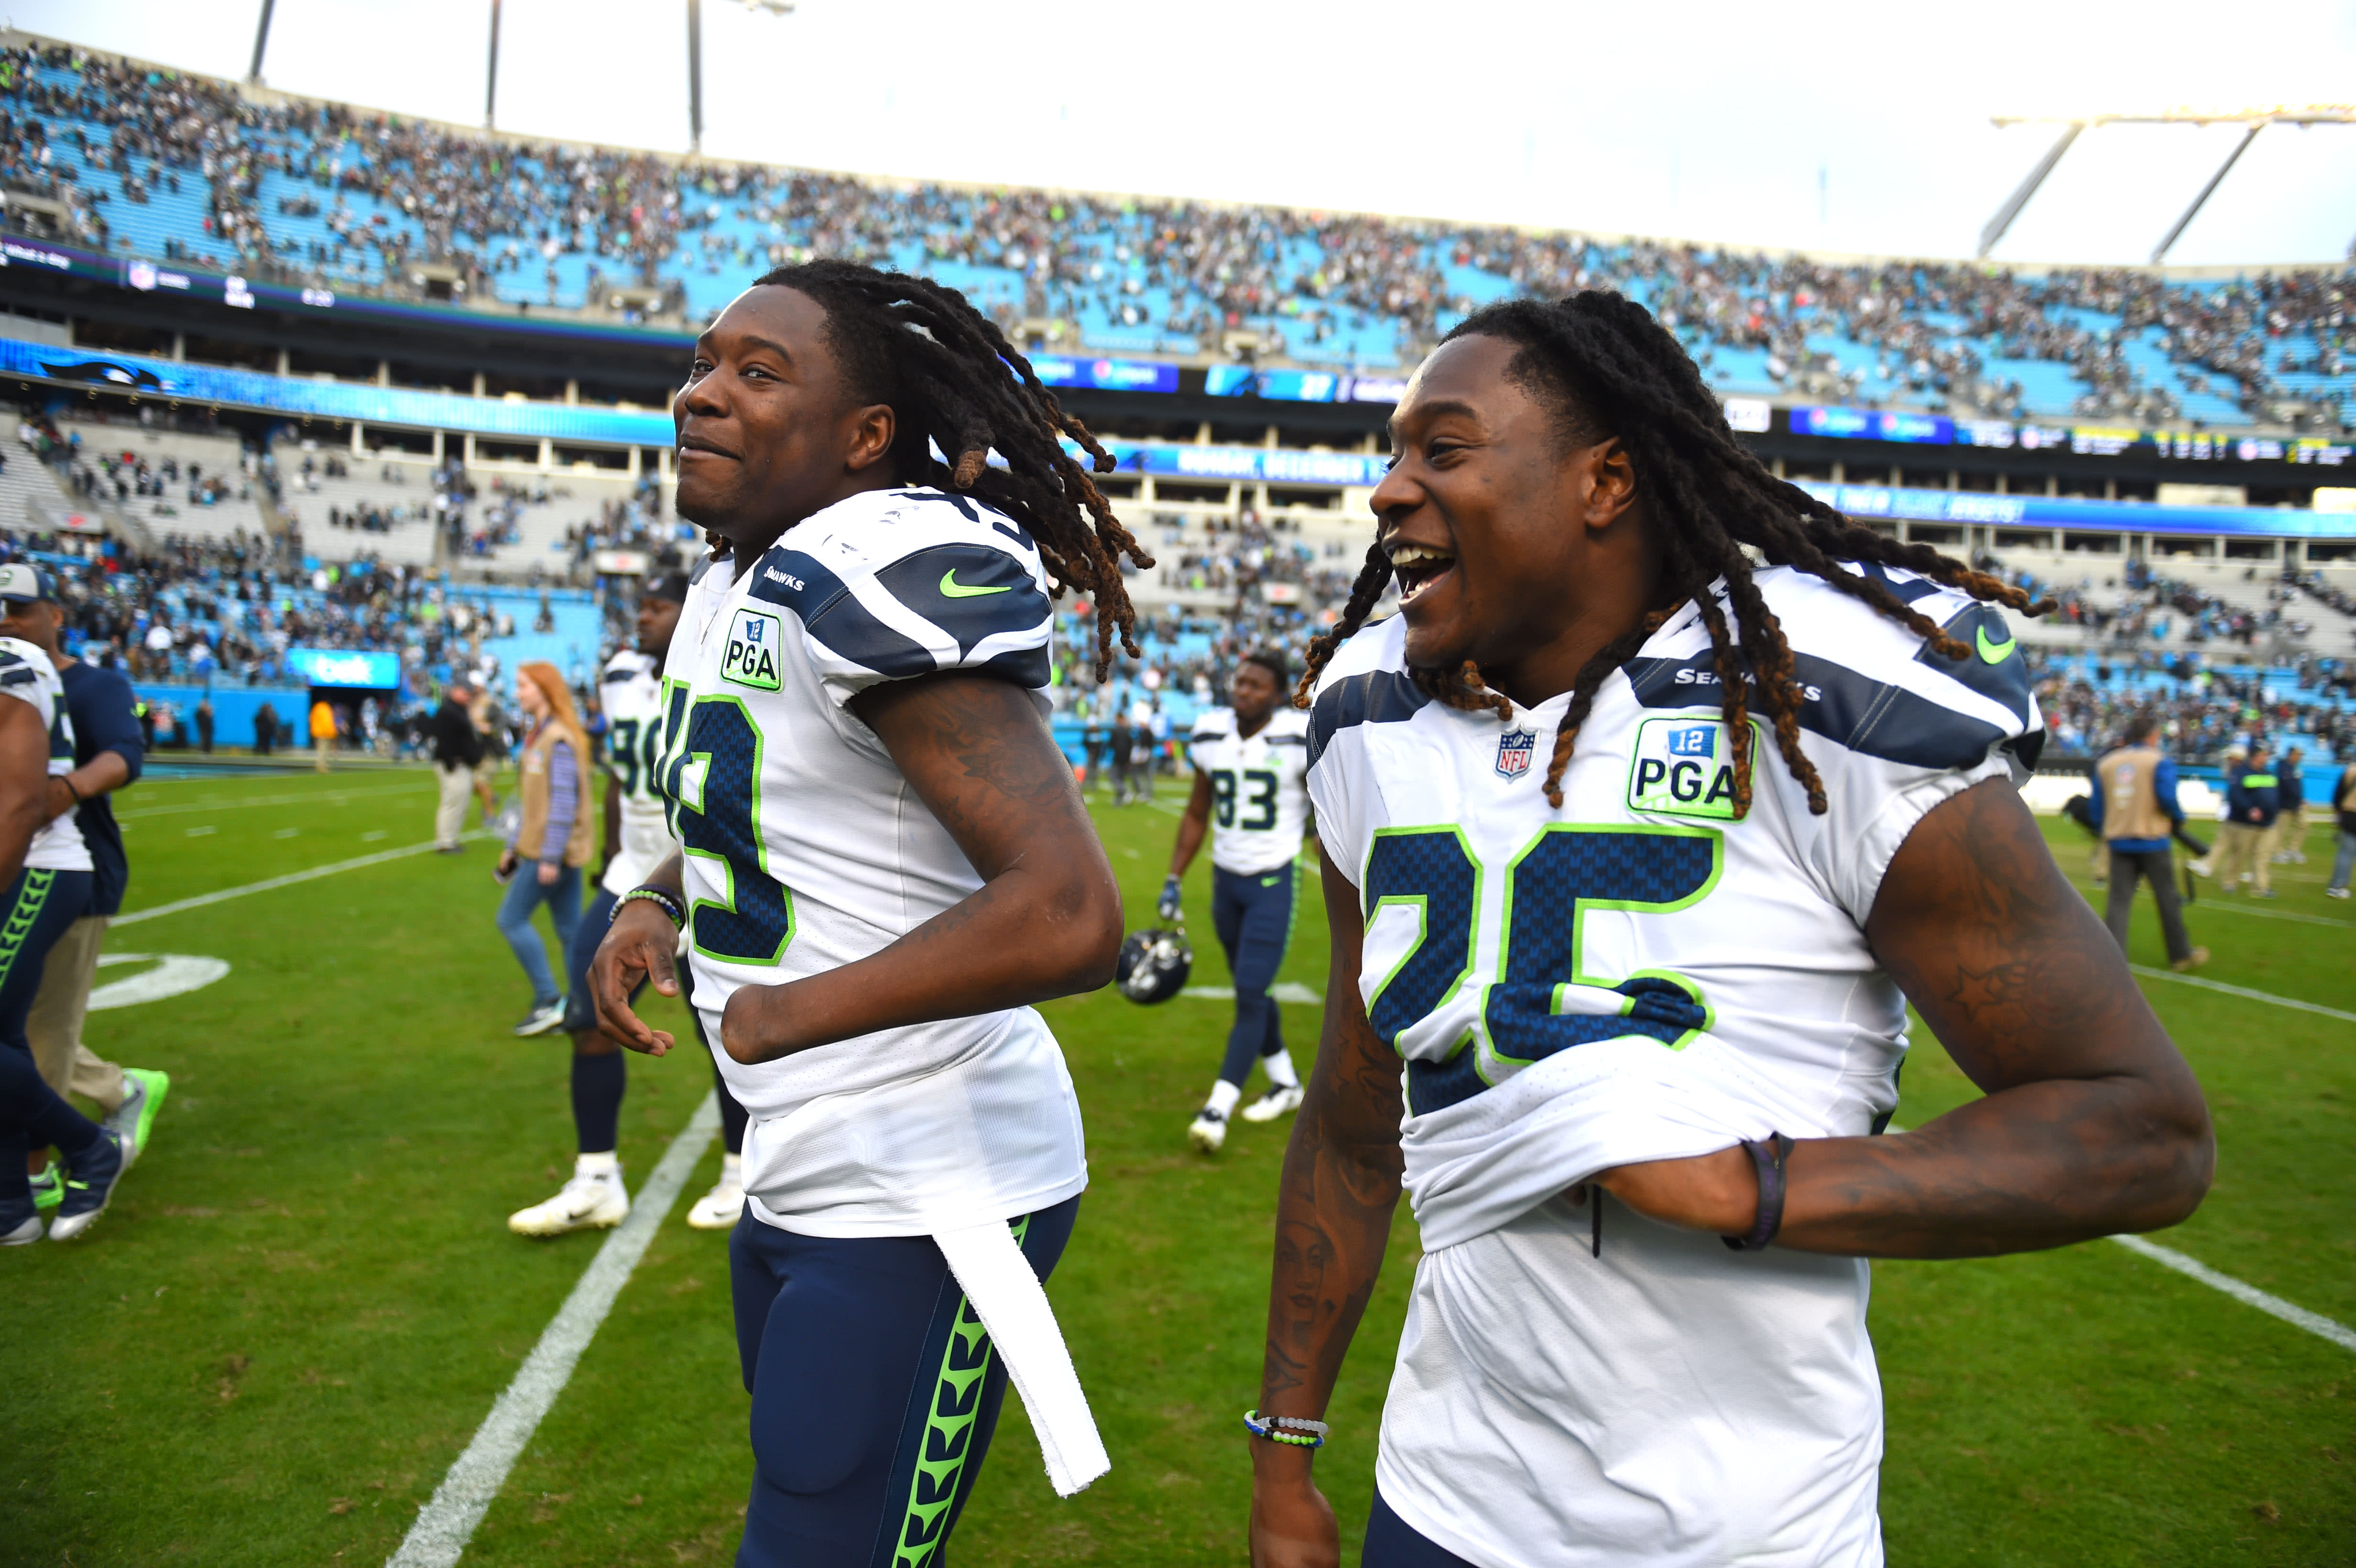 Shaquem and Shaquill Griffin bring more 